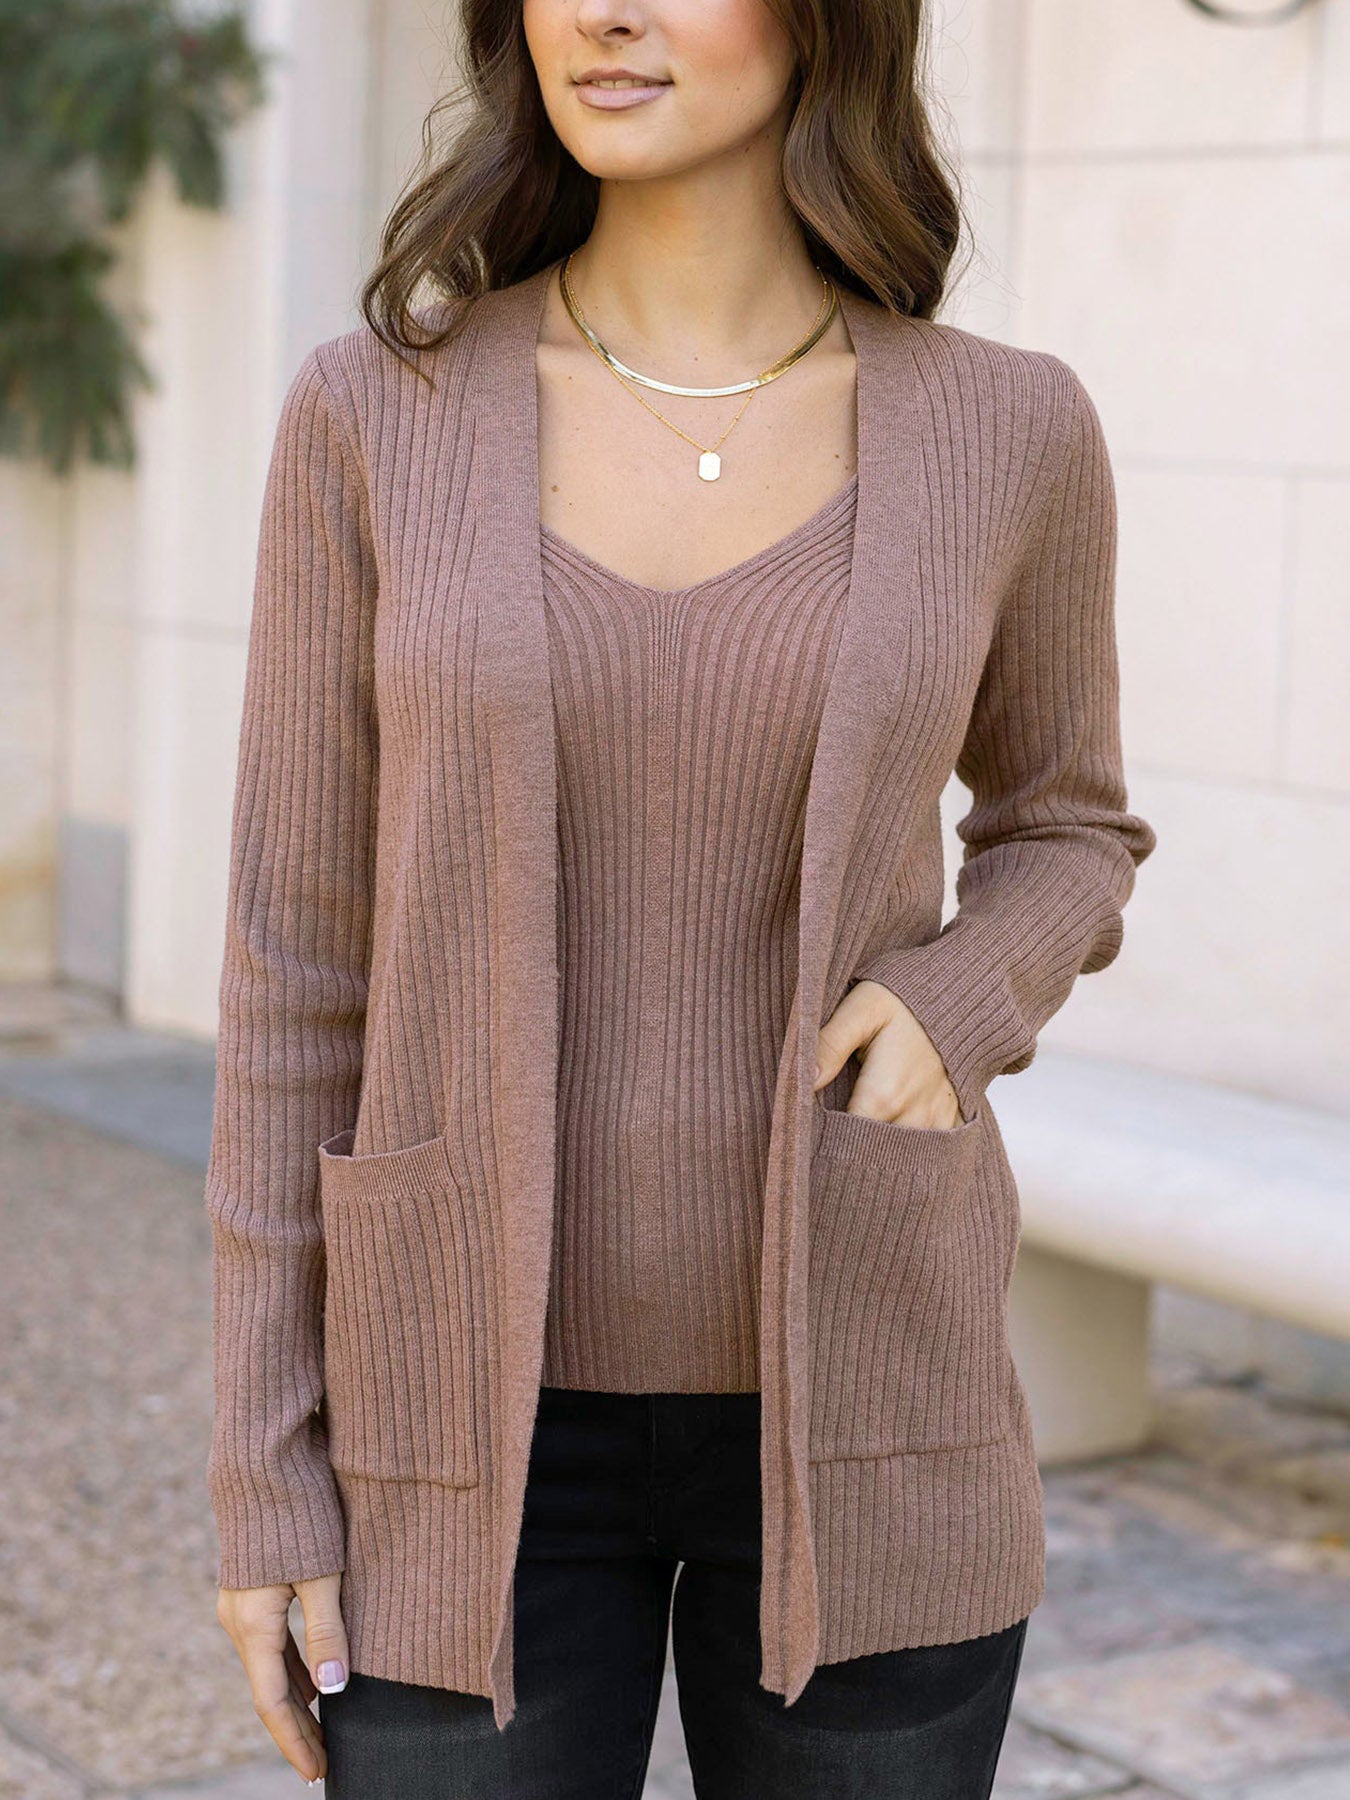 Ribbed Knit Cardigan in Latte by Grace & Lace